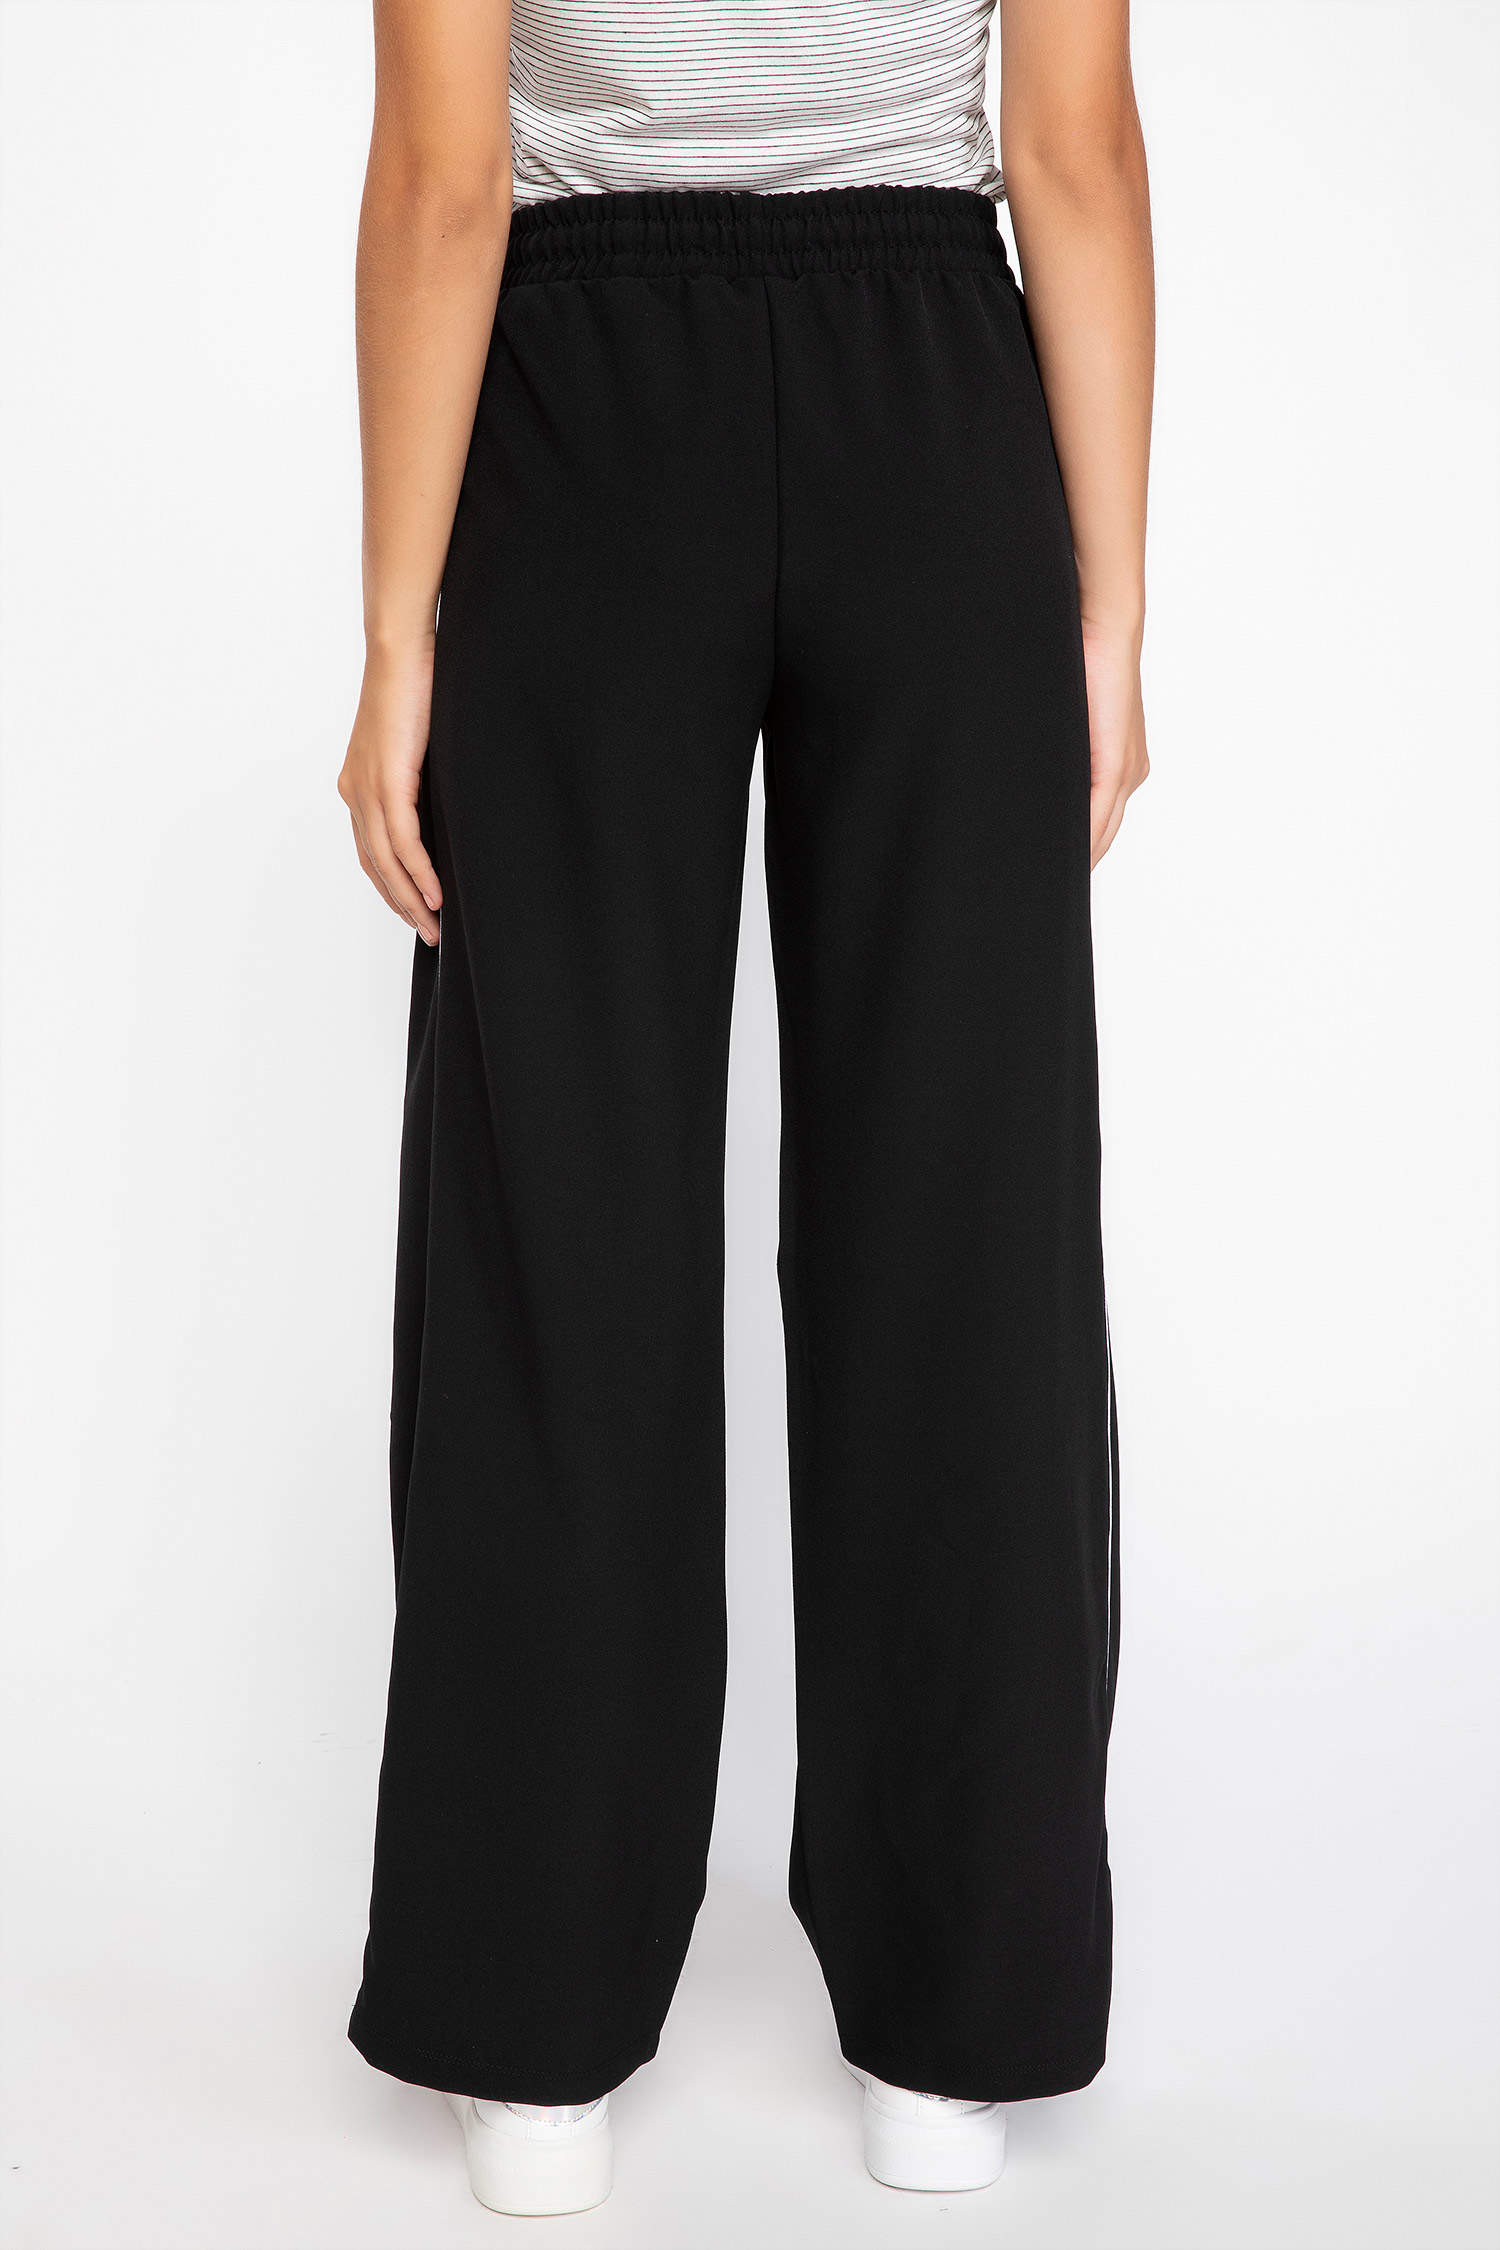 Defacto Woman Trousers. 2